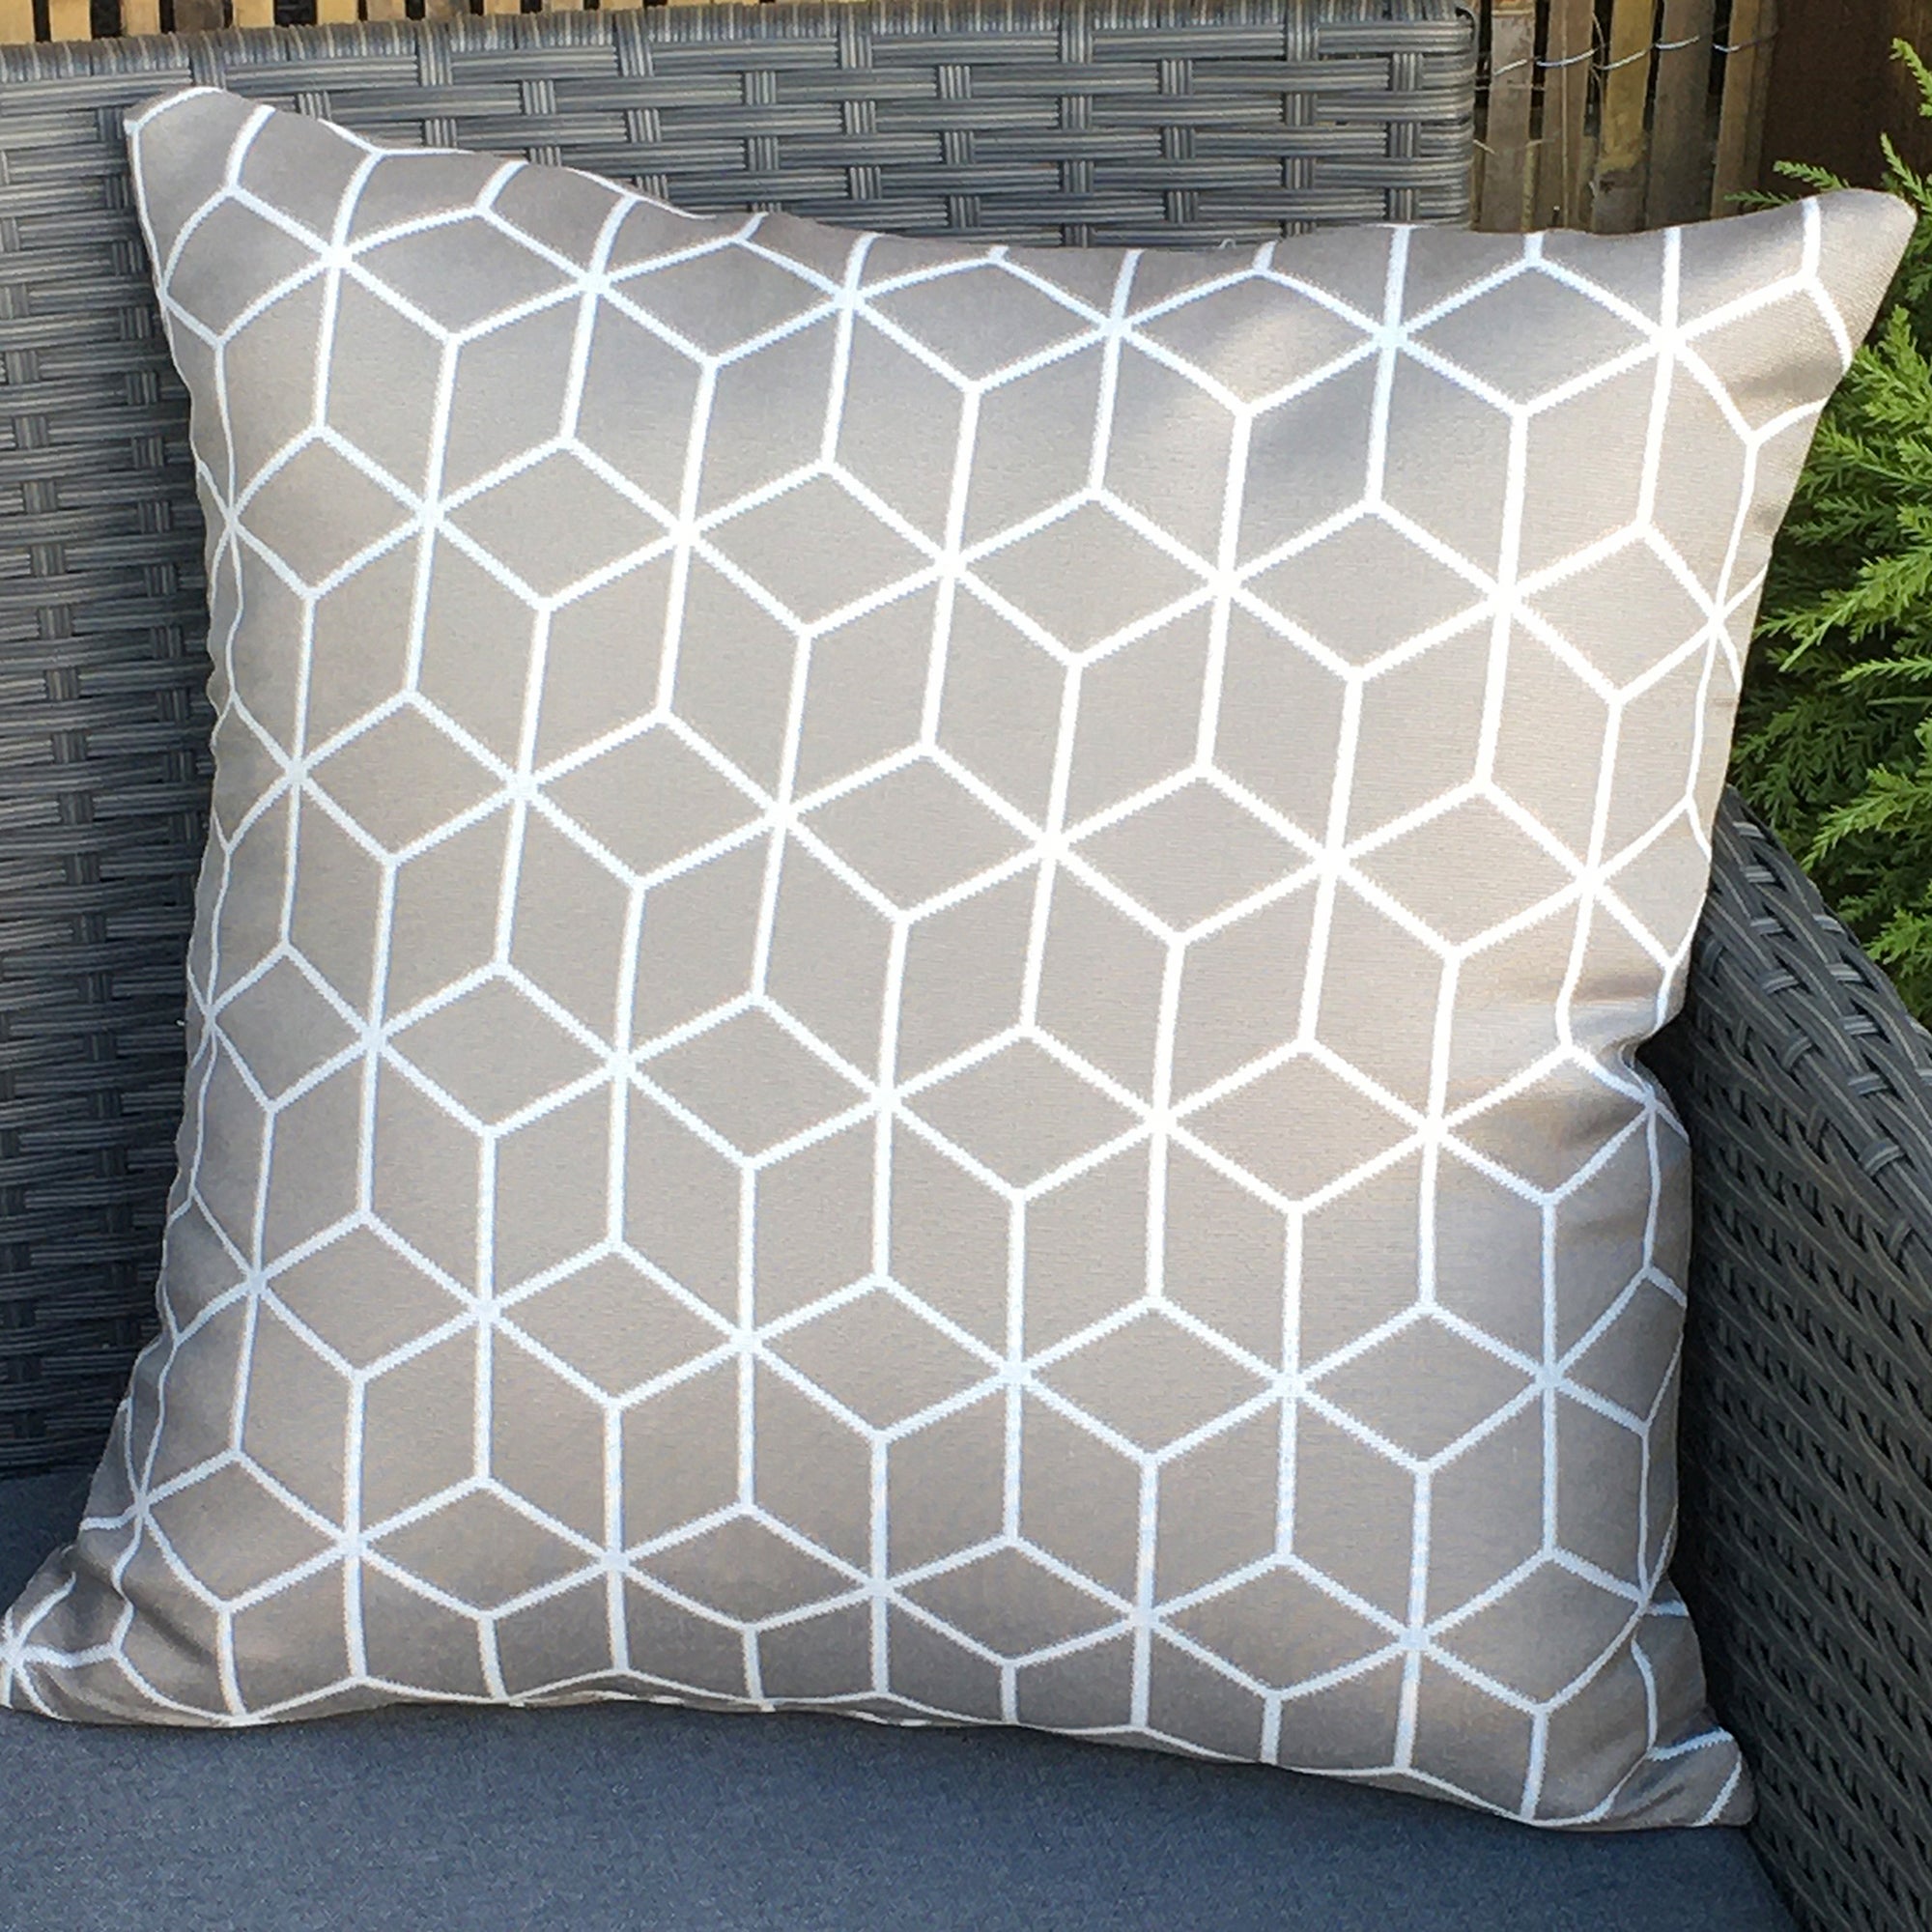 Set of 2 Geometric Scatter Outdoor Cushions